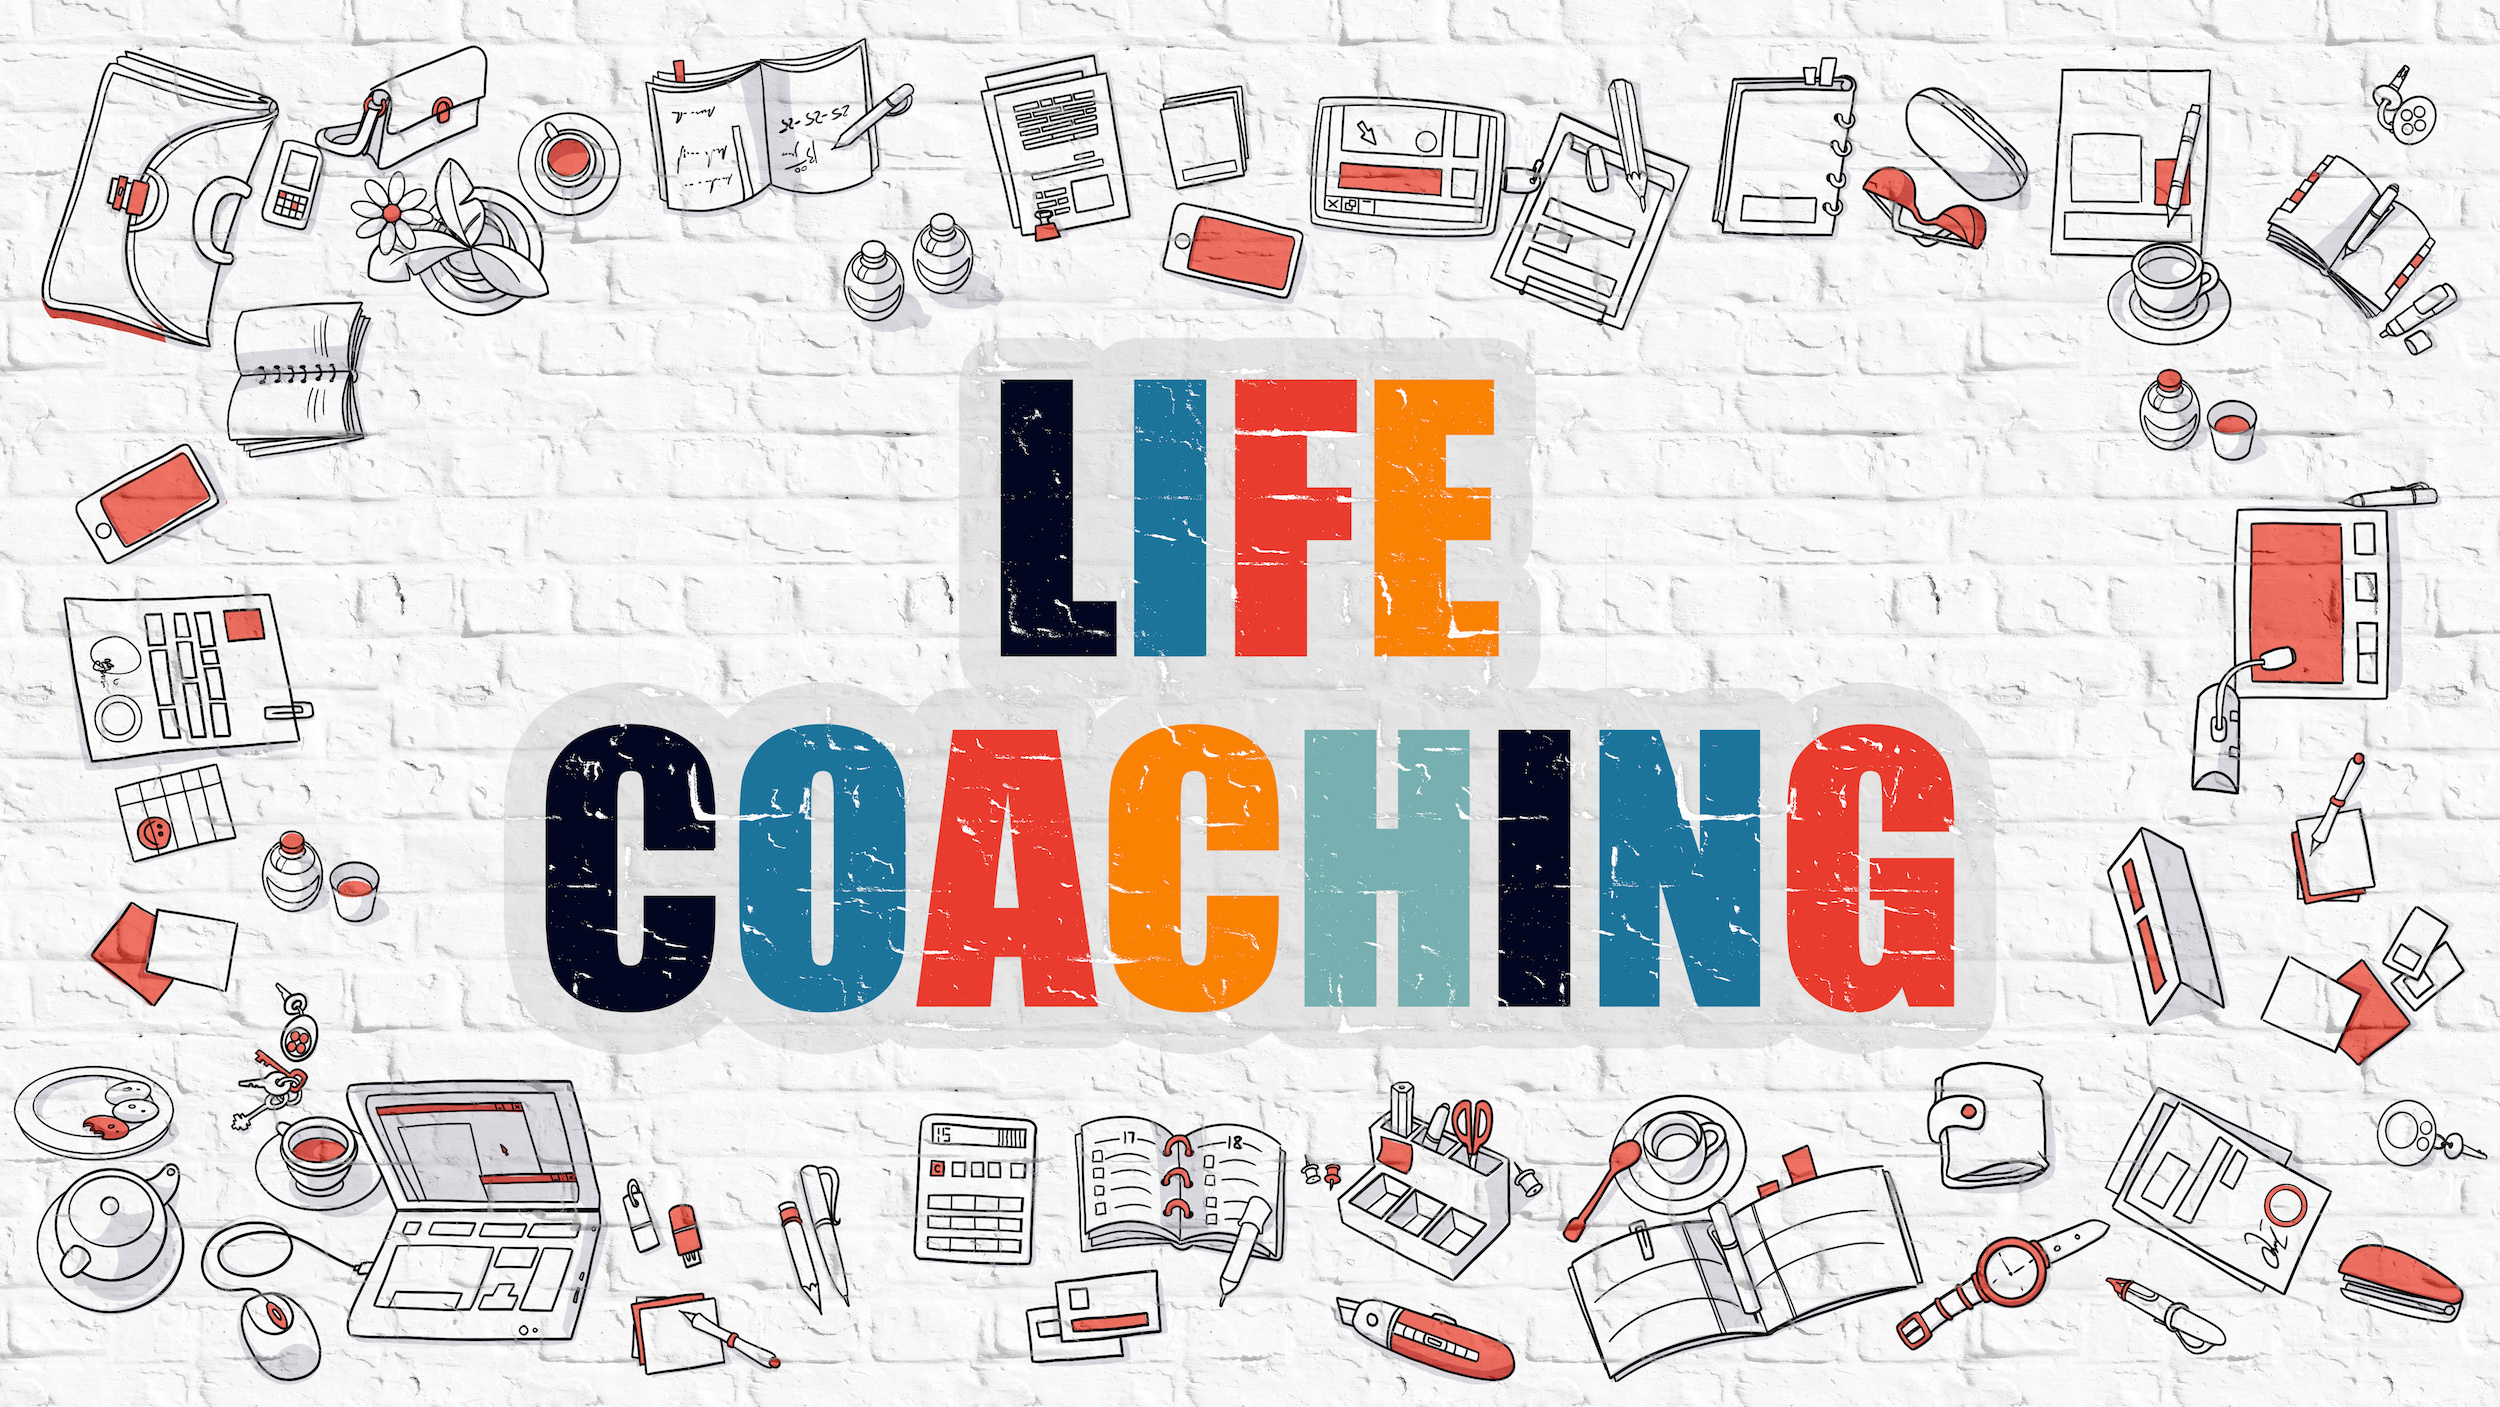 How to Become a Life Coach